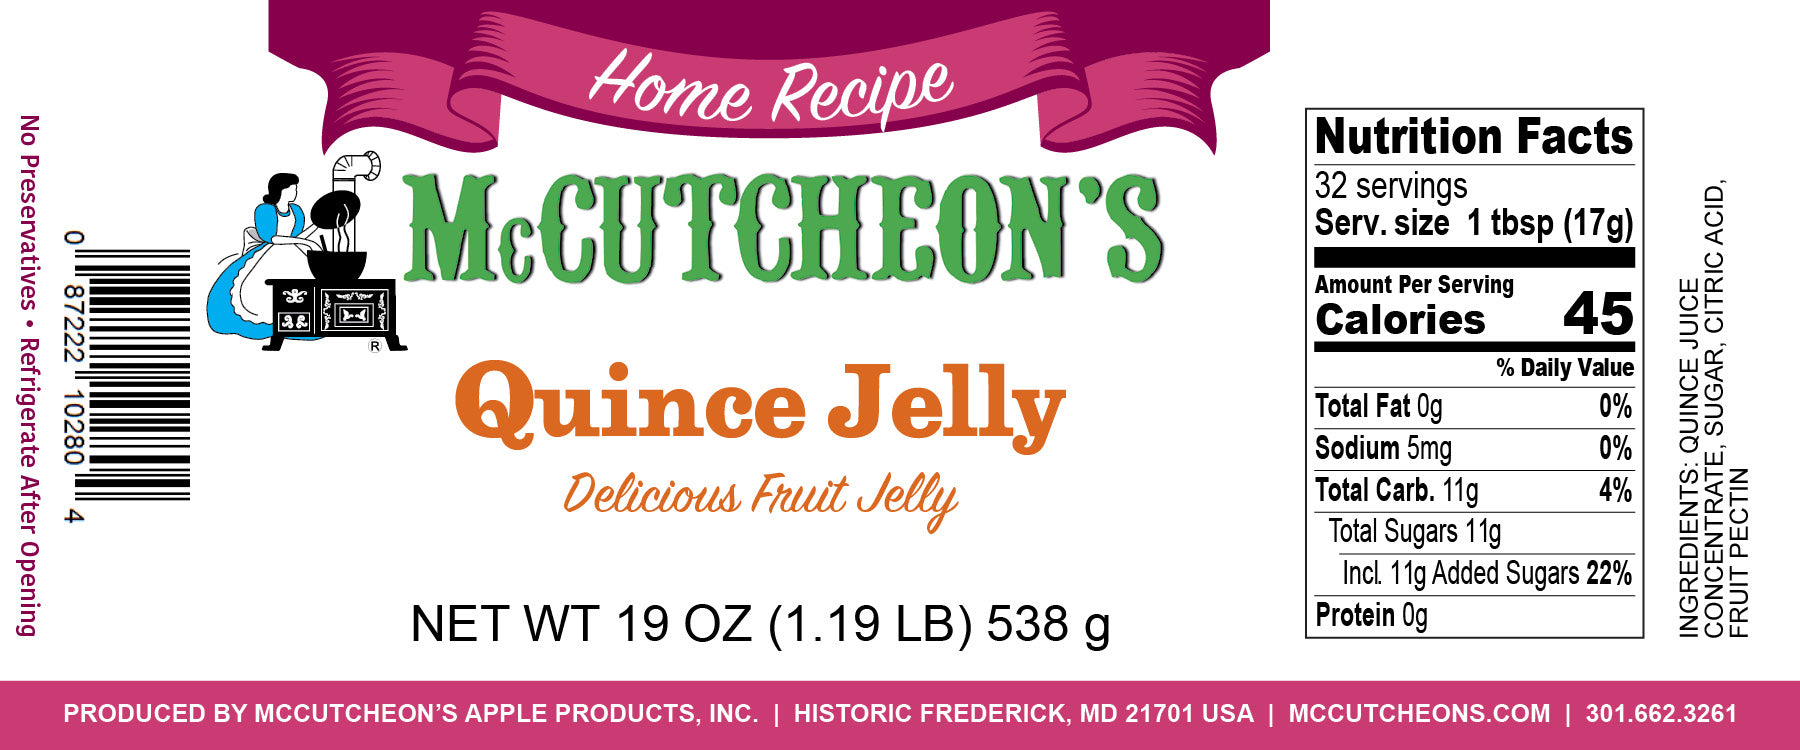 nutrition label for McCutcheon's quince jelly